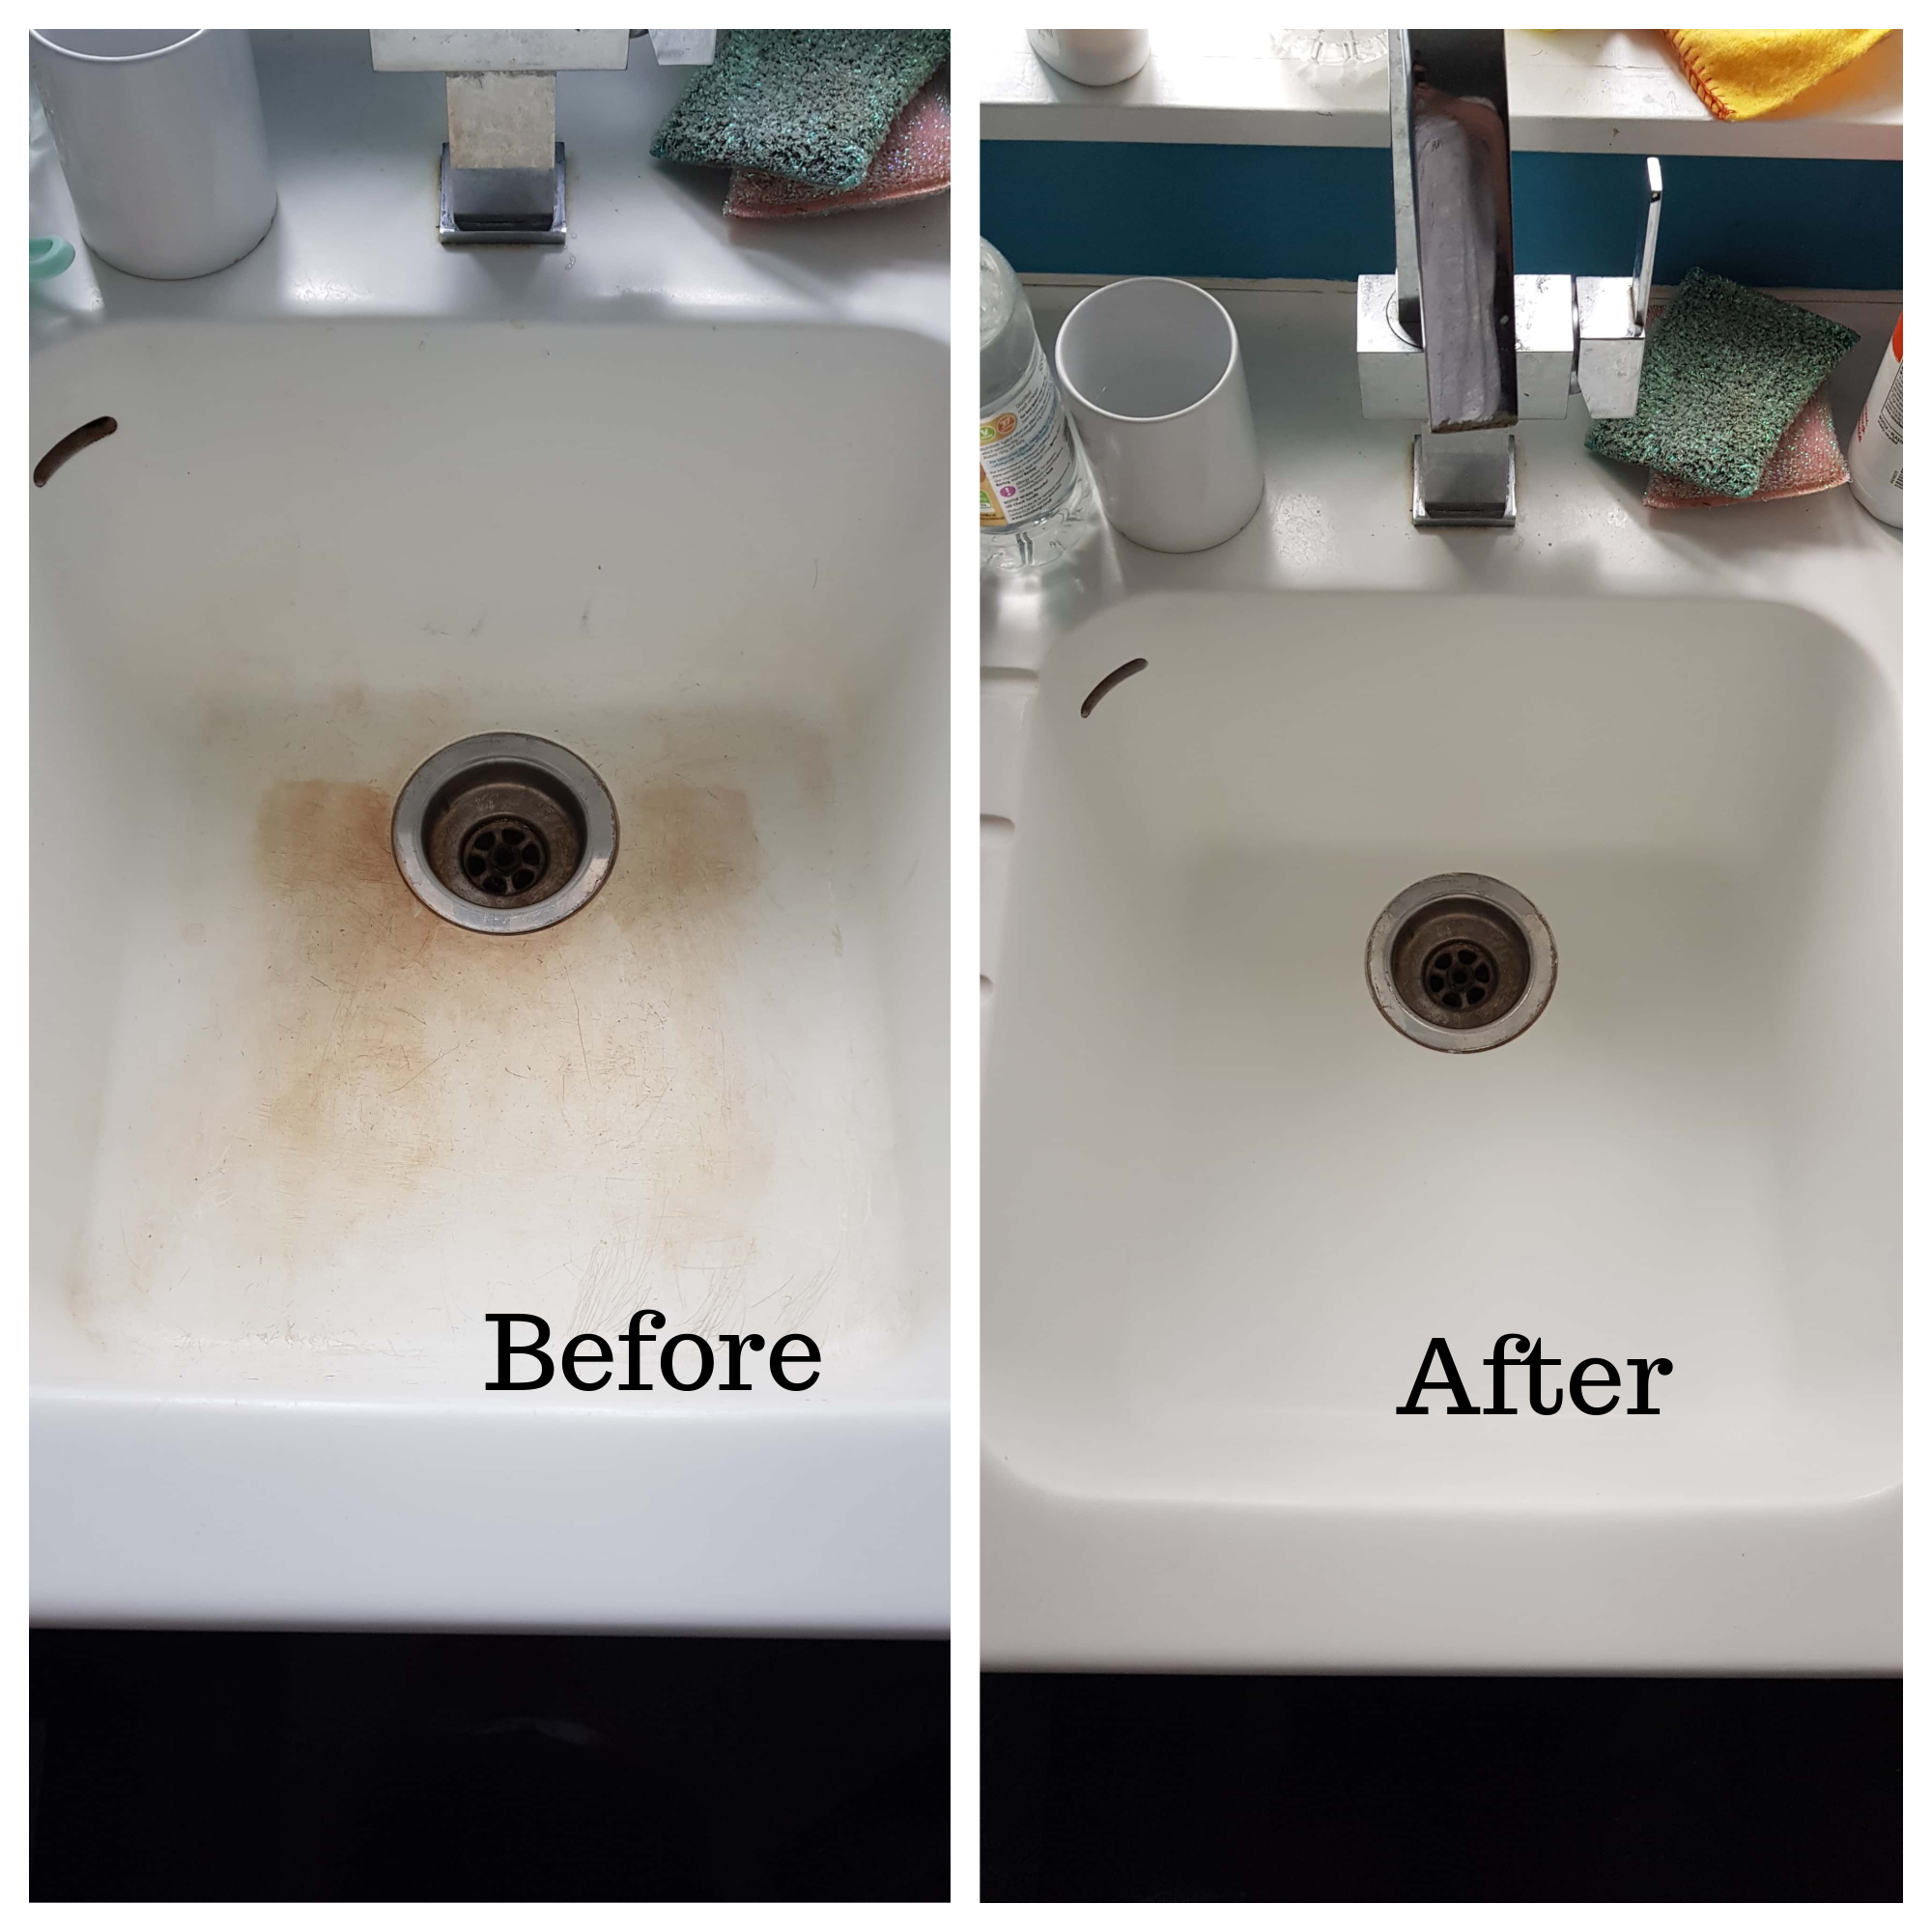 Corian Worktop Stains Removed In London, How To Fix Chipped Corian Countertop